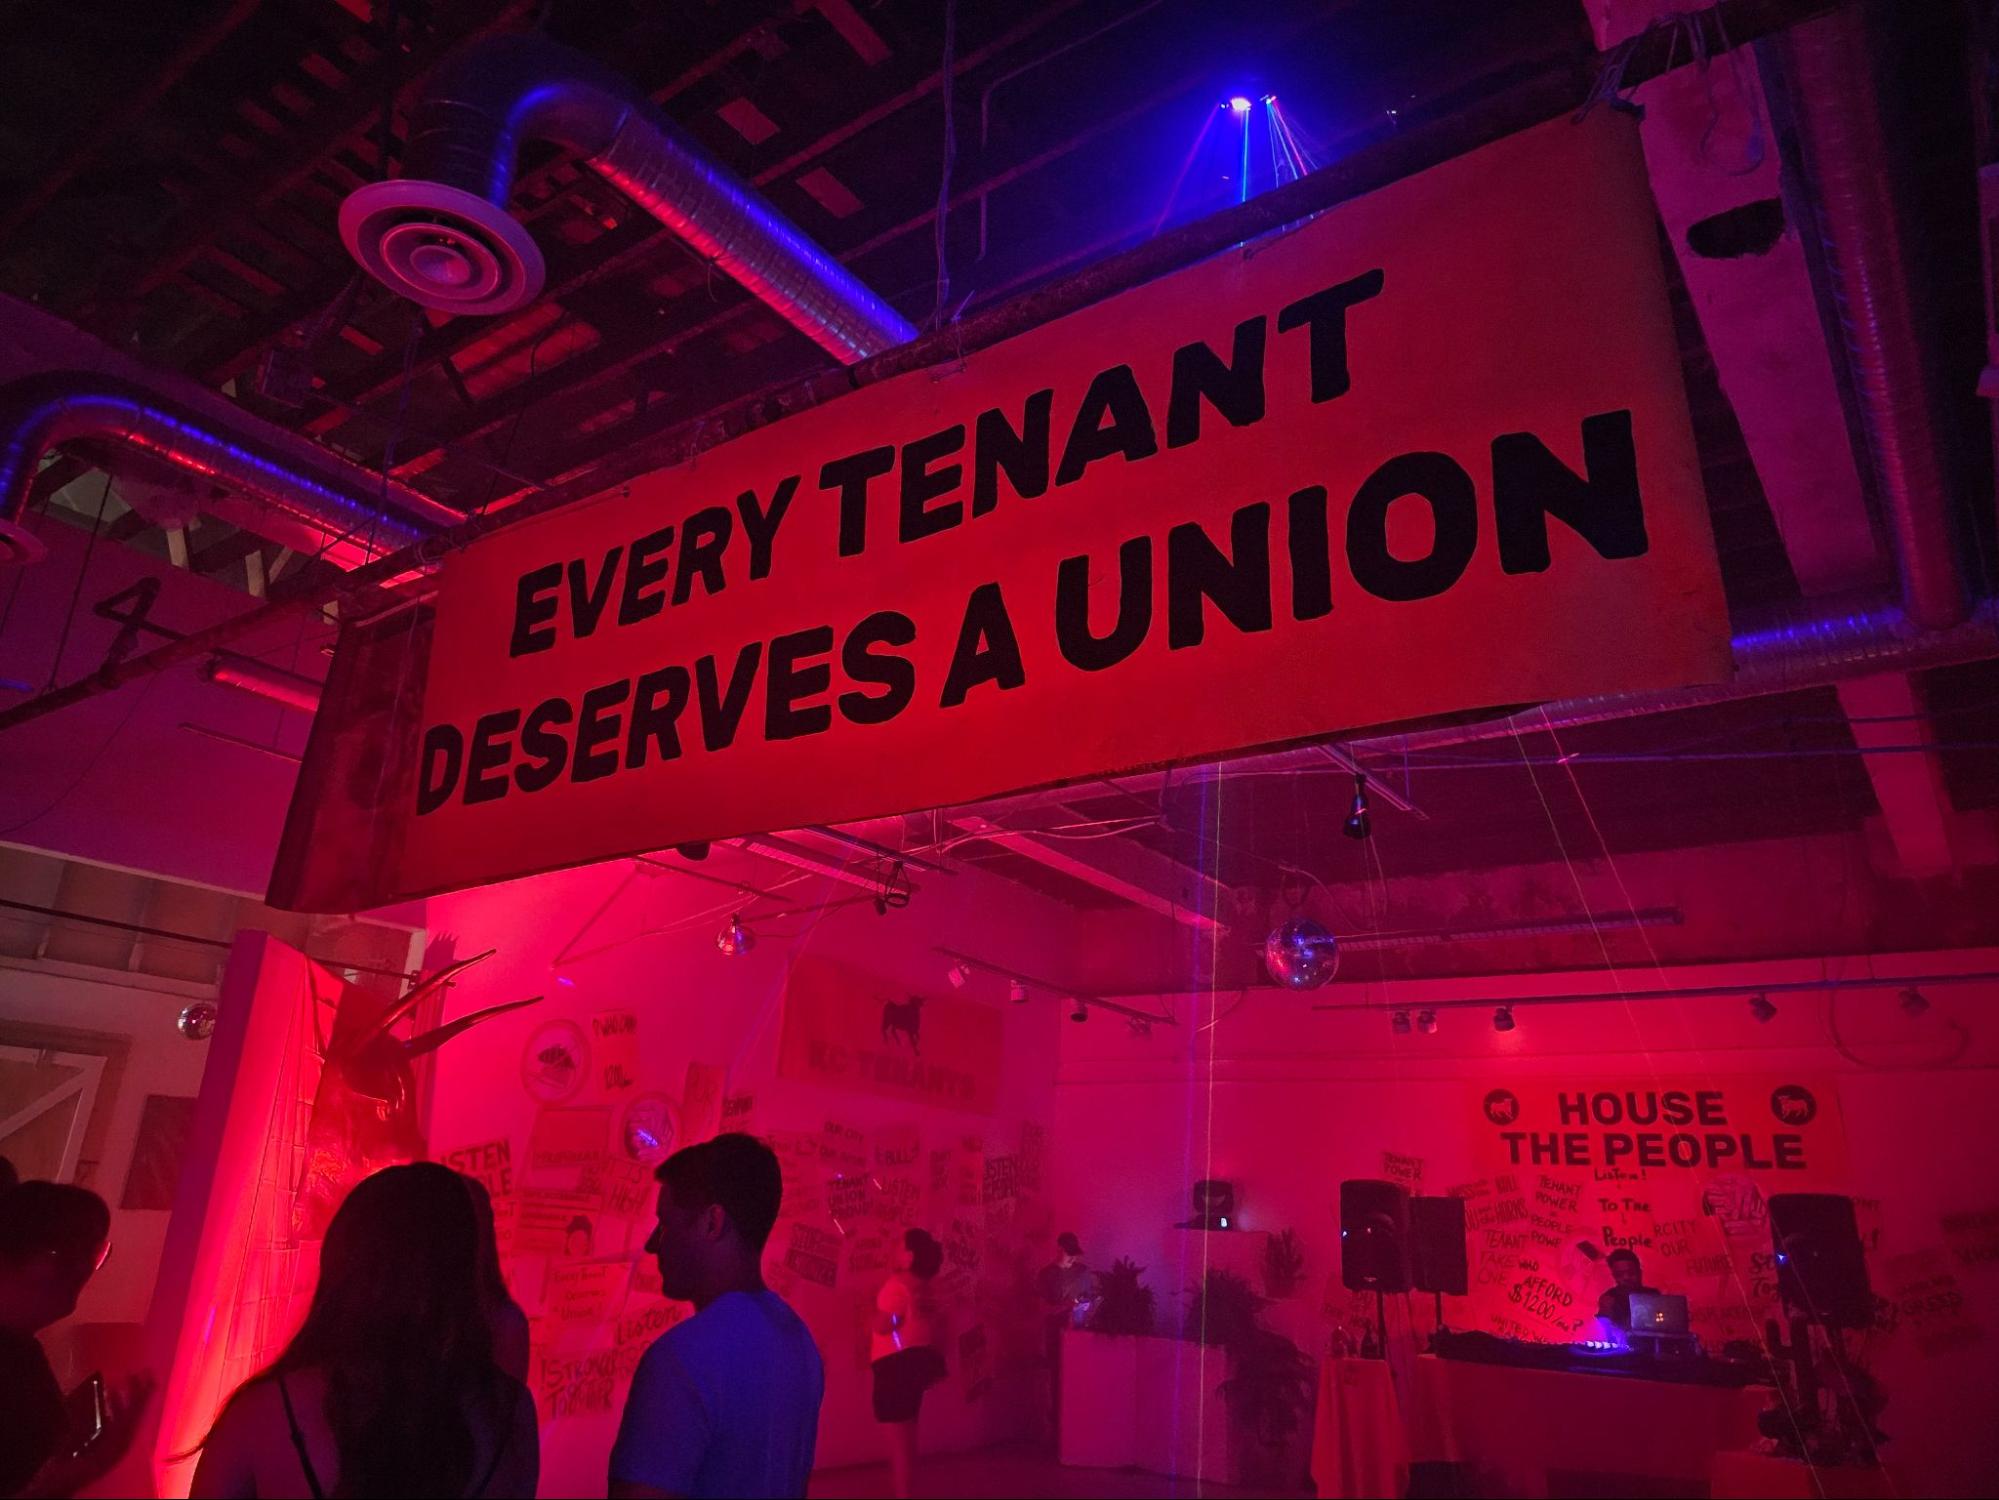 Image: Interior shot of the House the People party. A banner reading “Every Tenant Deserves a Union” is hanging across the upper portion of the photograph. People in the foreground mingle and look at art on the walls. A DJ booth is in the background. The entire scene is lit by red and blue lights. Photograph by Cult Mayor.